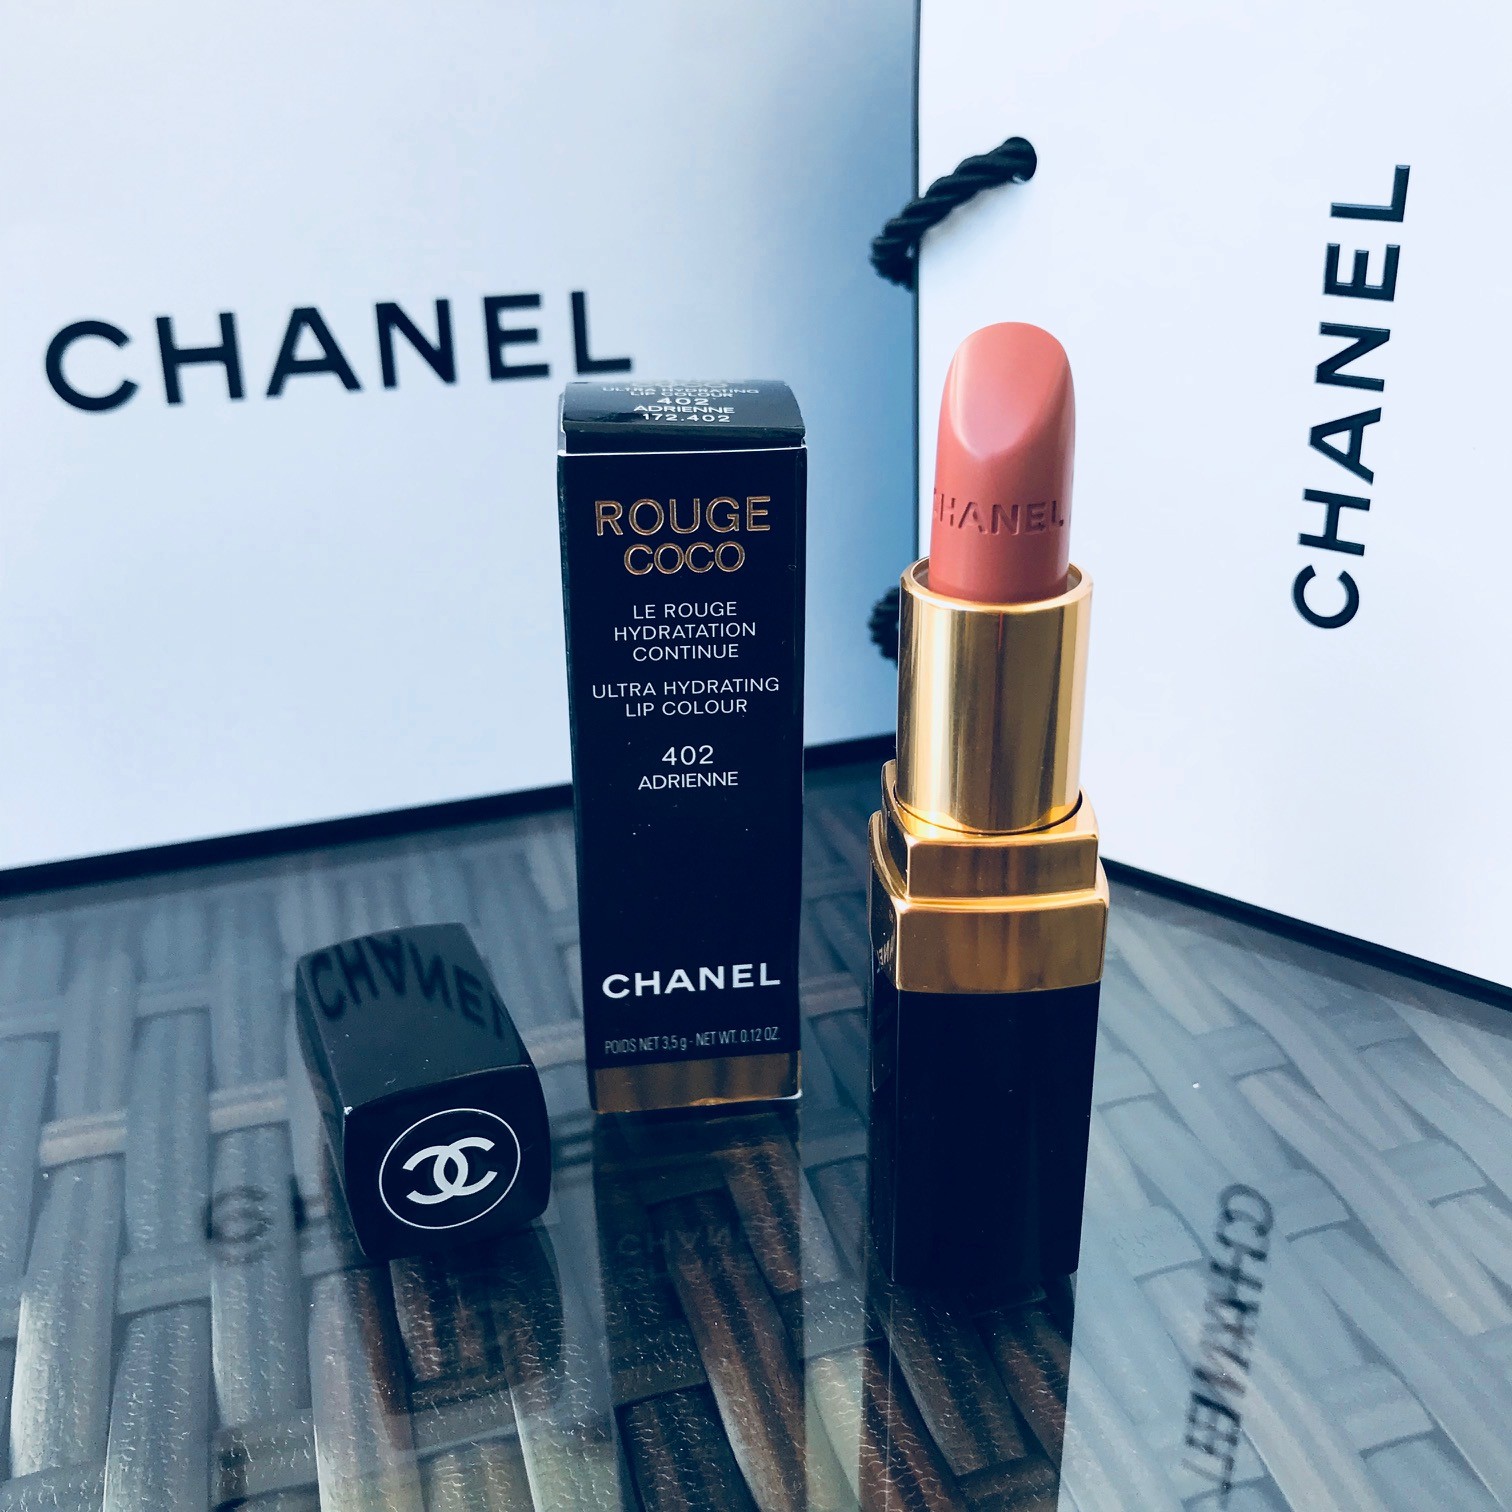 CHANEL Rouge Coco Ultra Hydrating Lip Colour Choose Your Shade 432 Cecile  for sale online